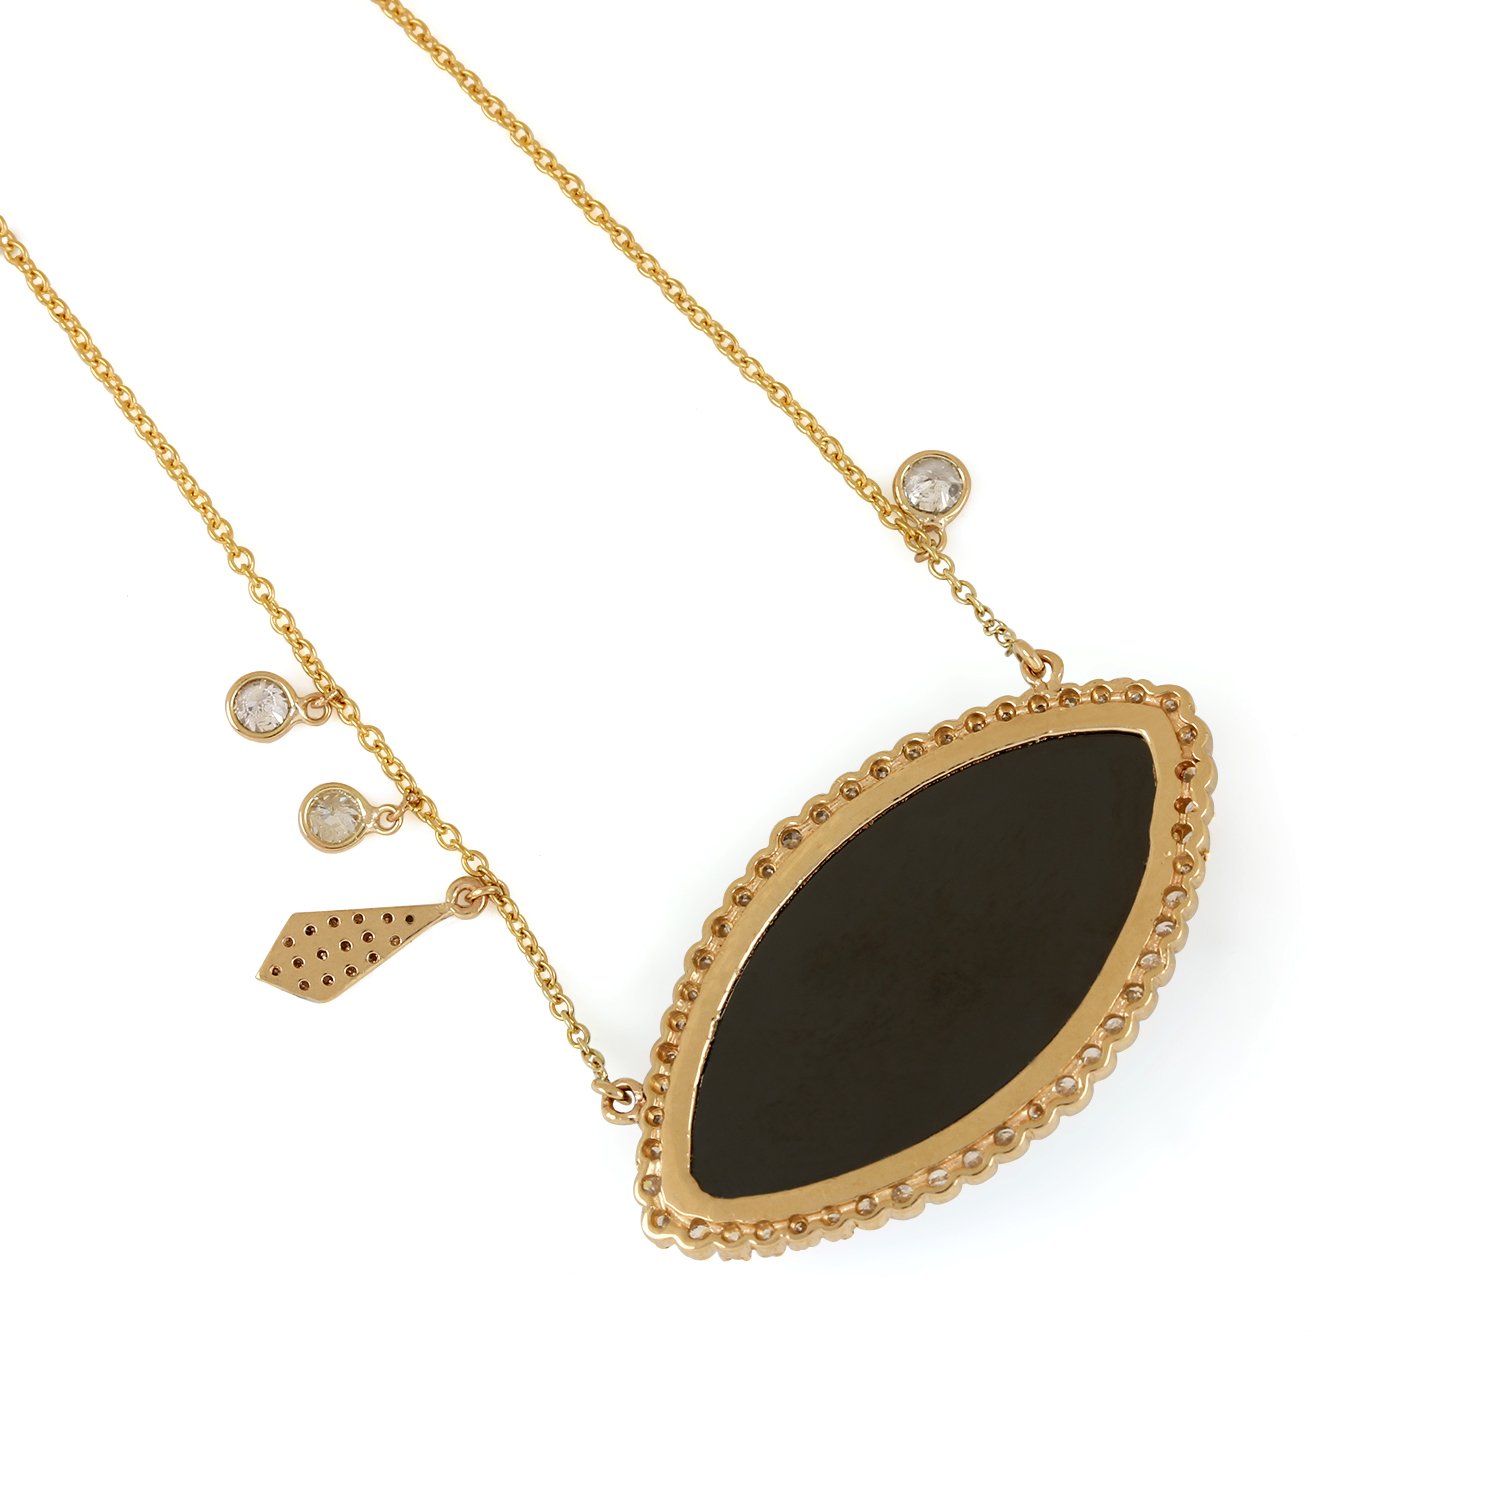 14K Solid Gold Pave Diamond Pendant Chain Necklace Balck Spinel Jewelry